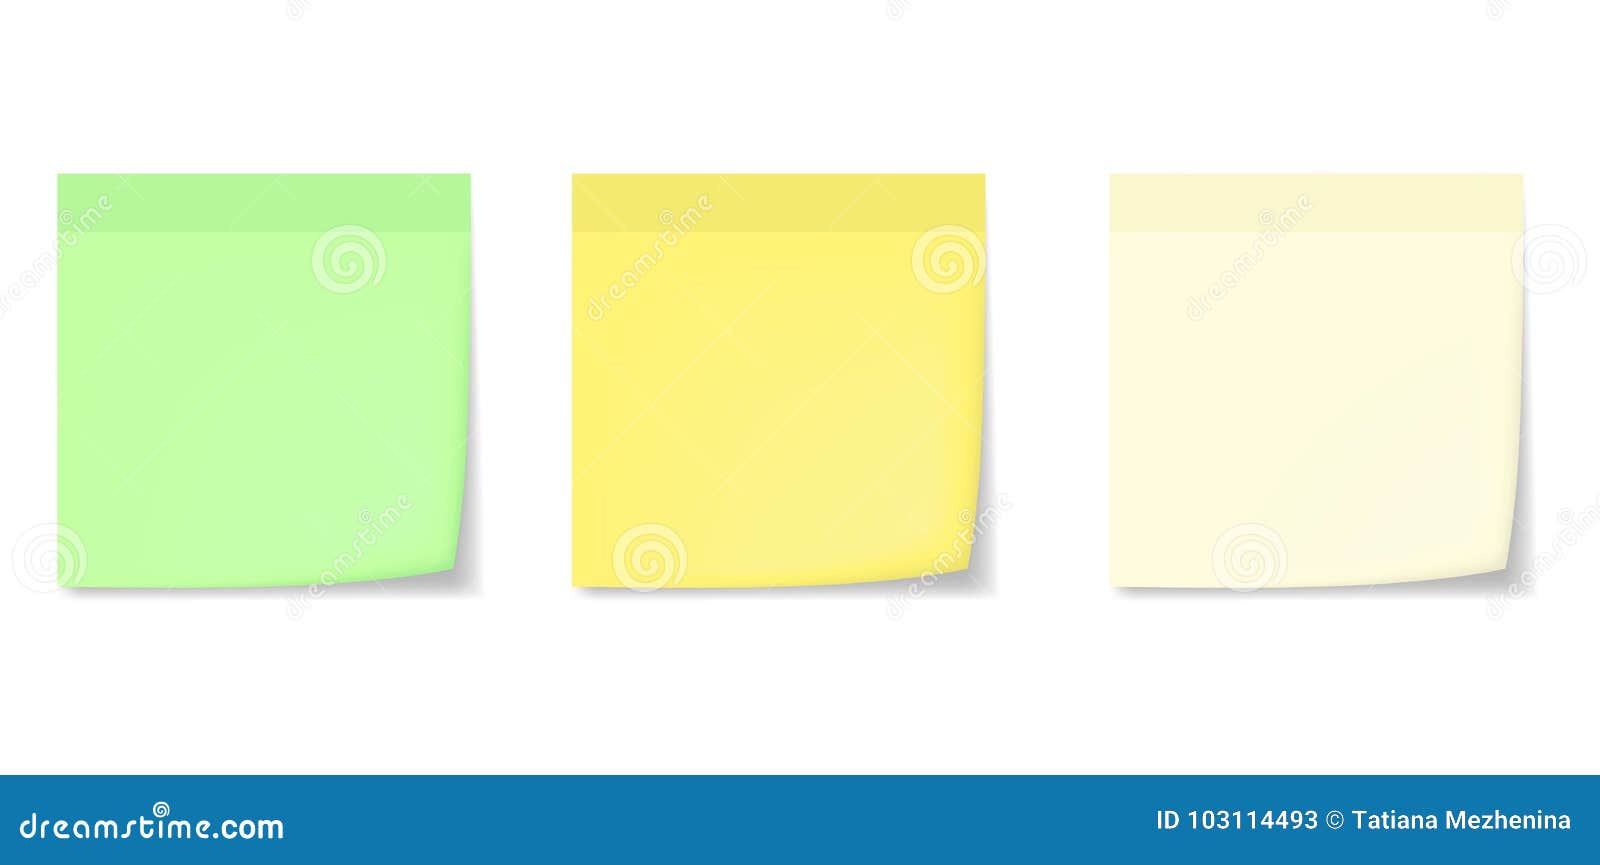 Download Realistic Memo Stickers With Shadow Mockups Stock Illustration Illustration Of Paper Curled 103114493